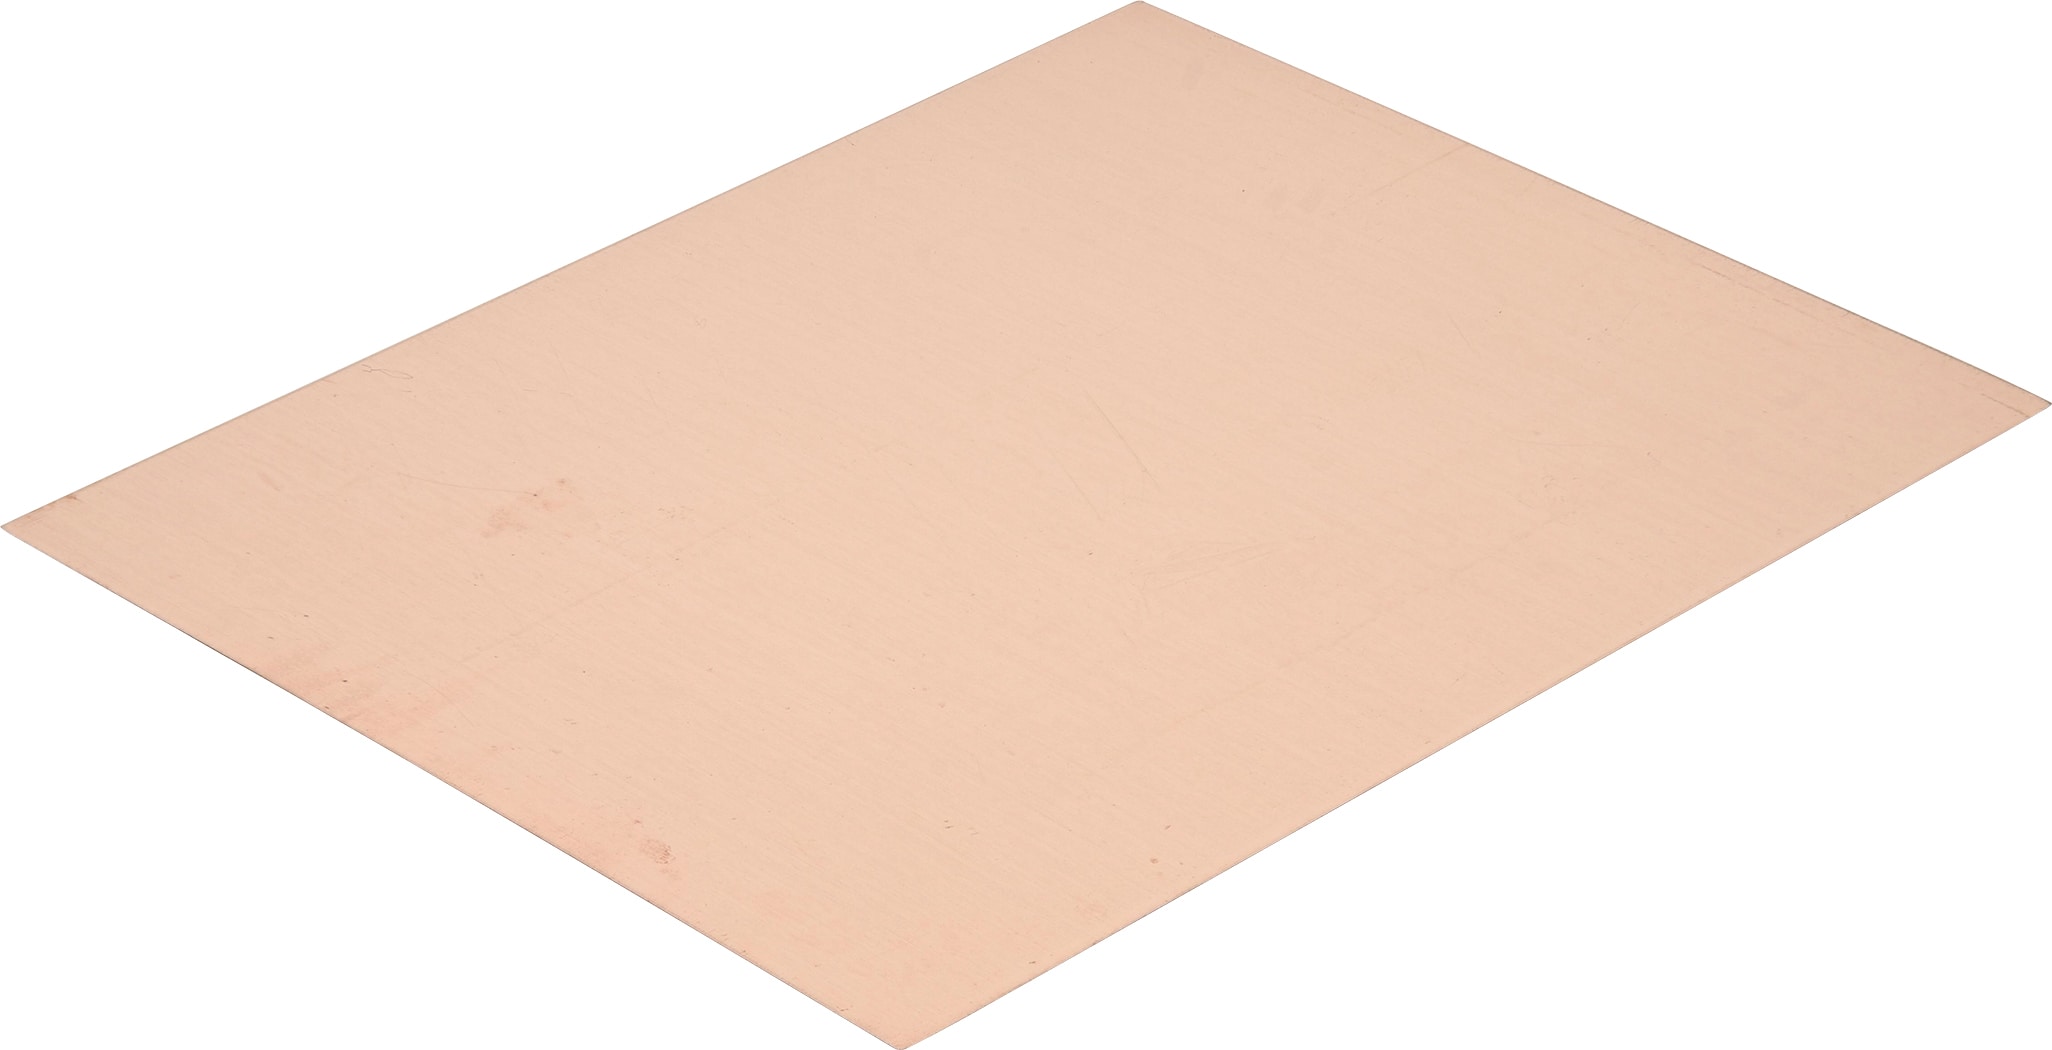 COPPER SHEET PLATE guillotine cut many sizes. 0.7 MM thick 